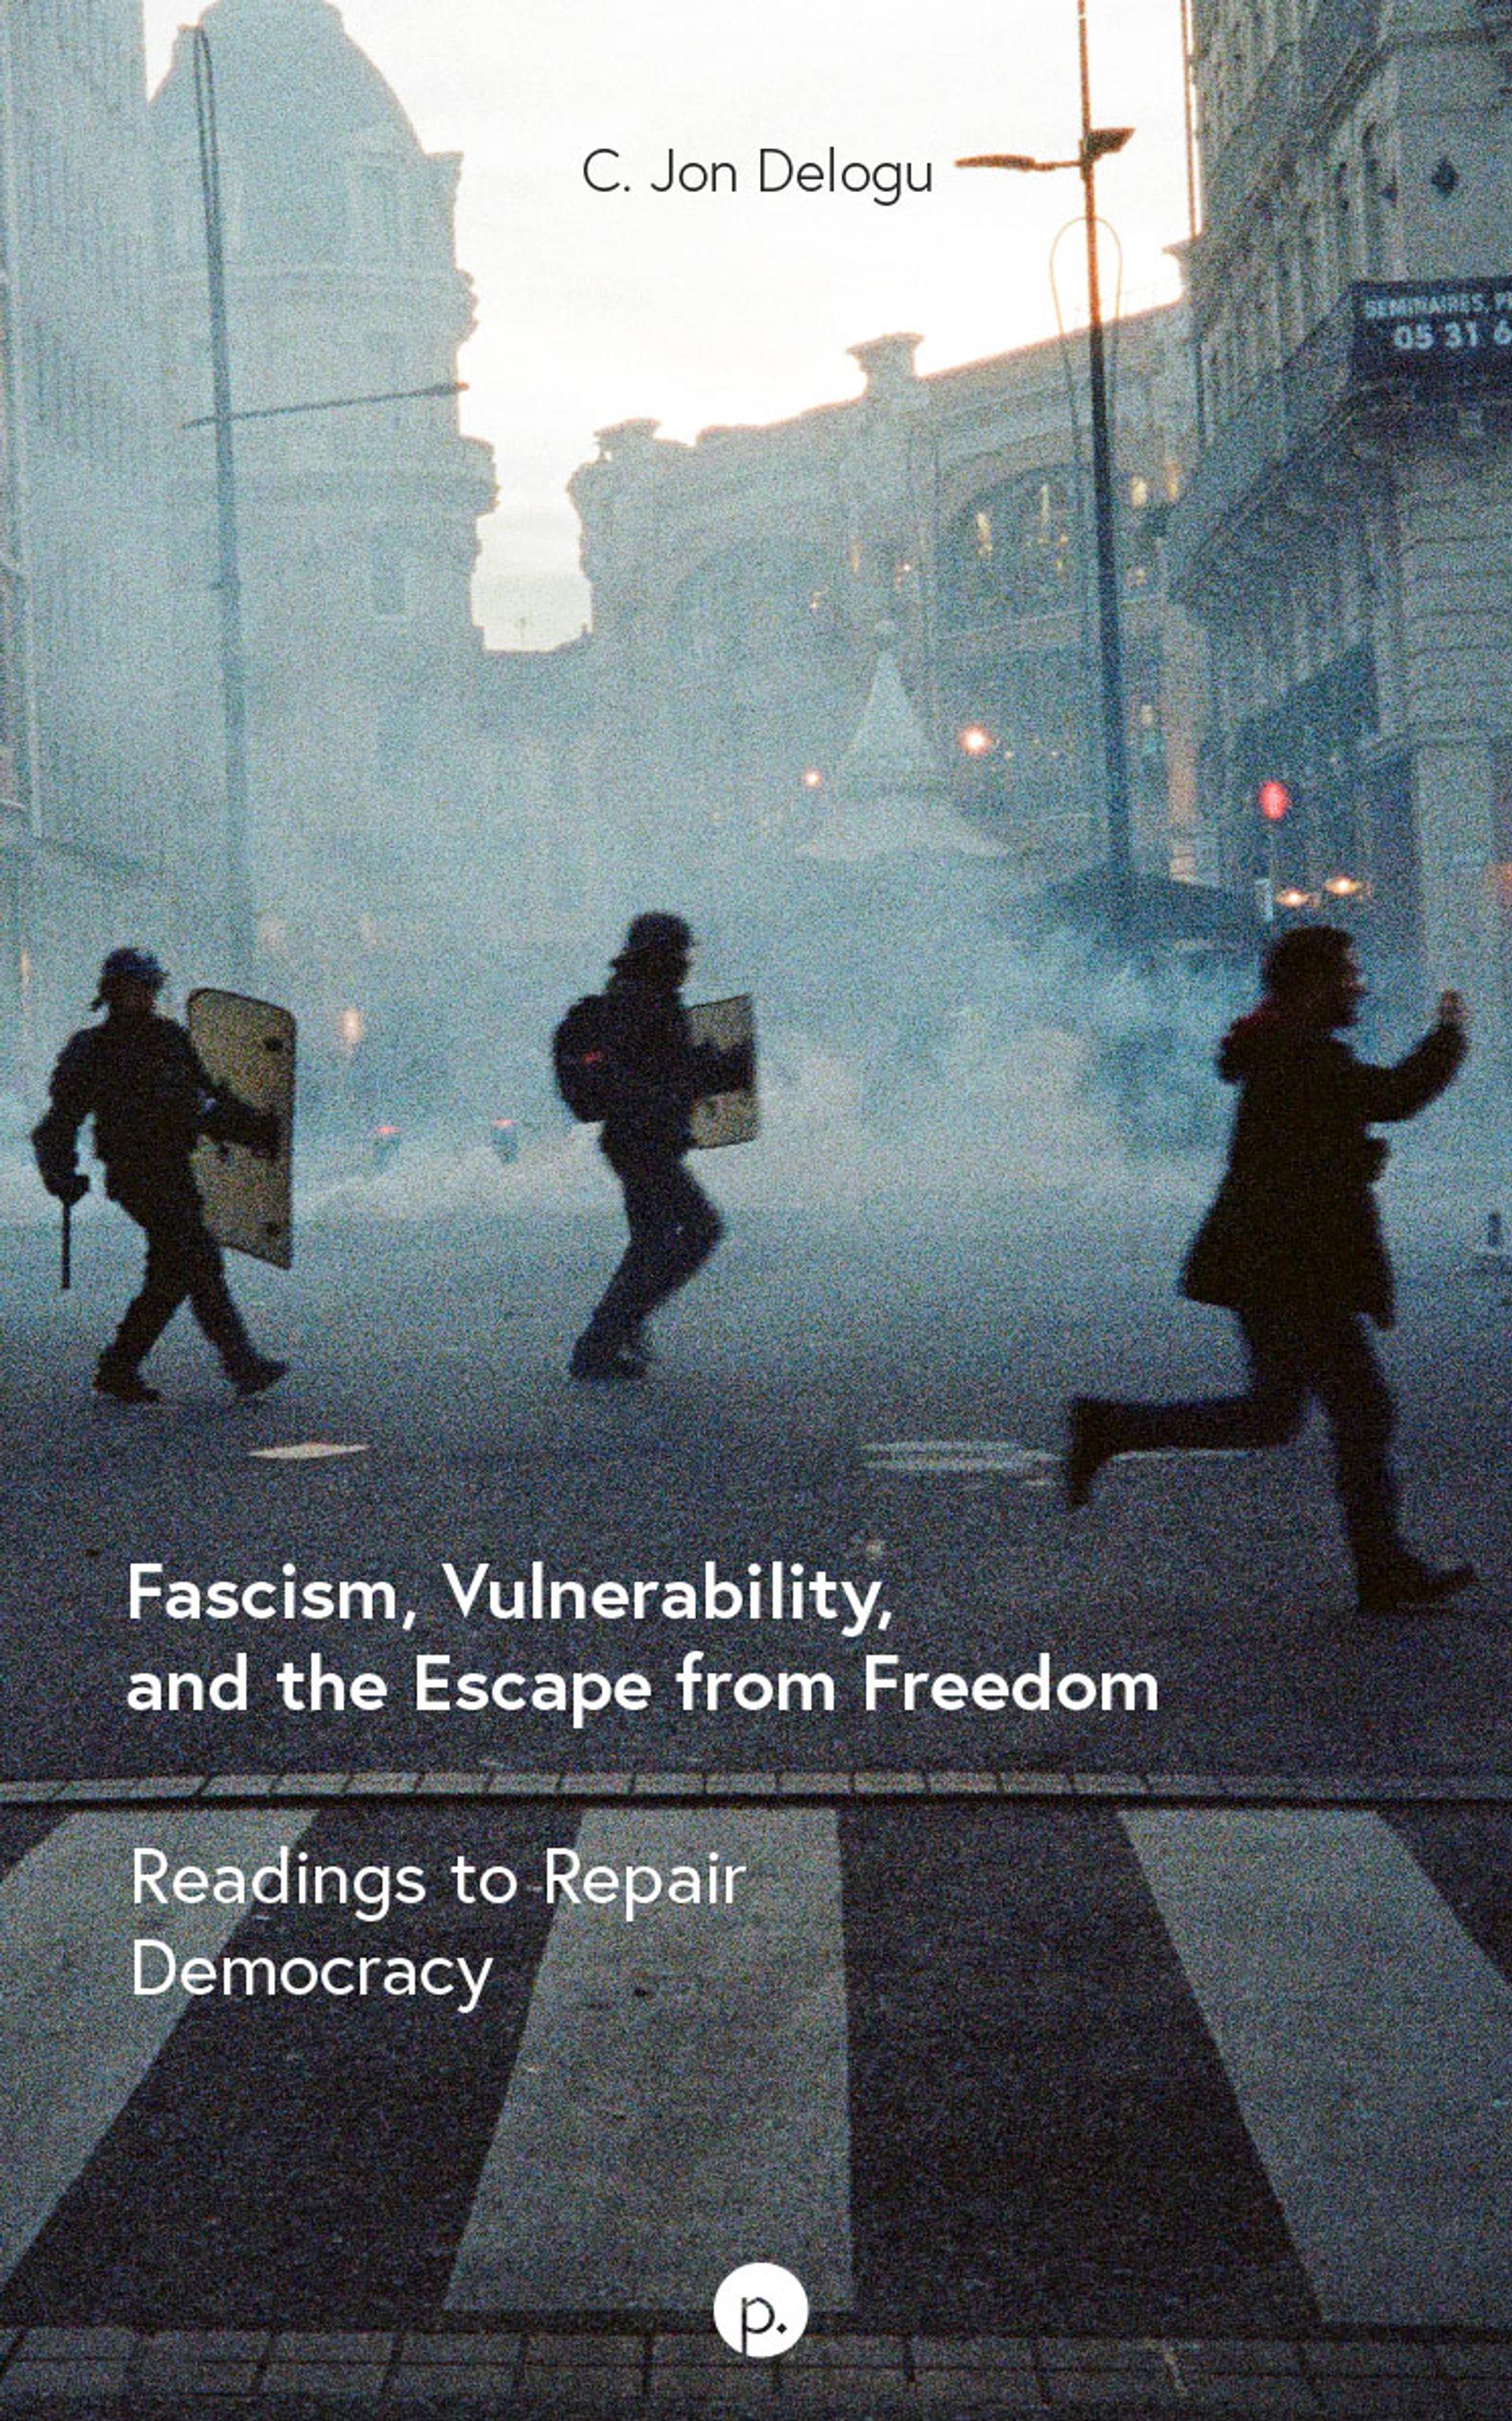 Cover of book titled Fascism, Vulnerability, and the Escape from Freedom: Readings to Repair Democracy